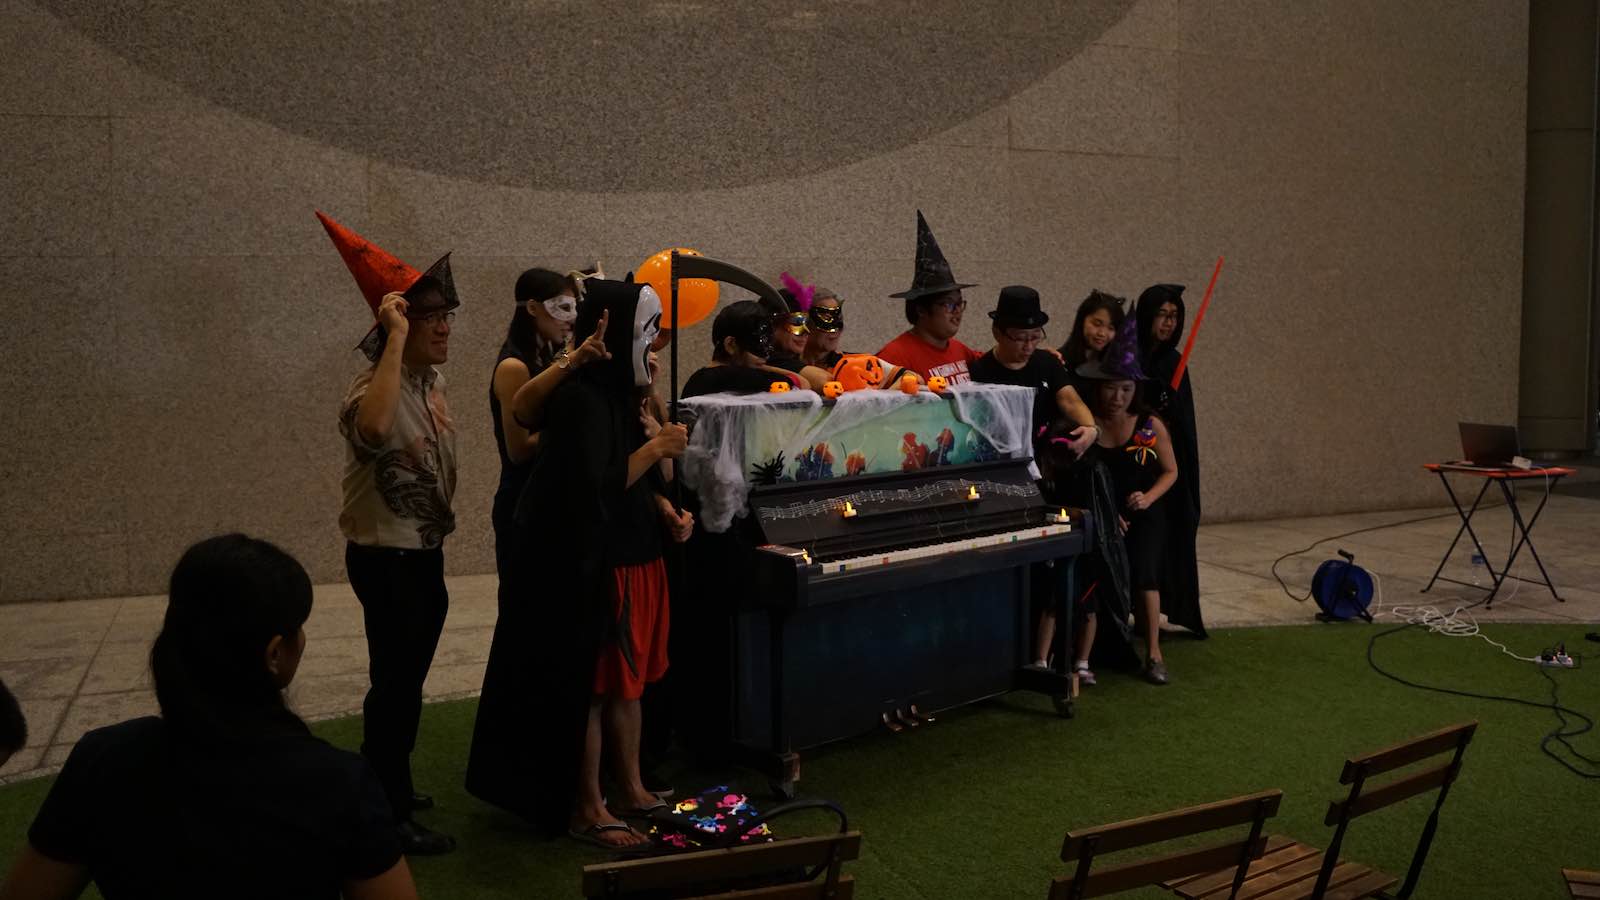 Would never had though I'd spend Halloween this year around a piano but I really enjoyed it with this amazing community of people